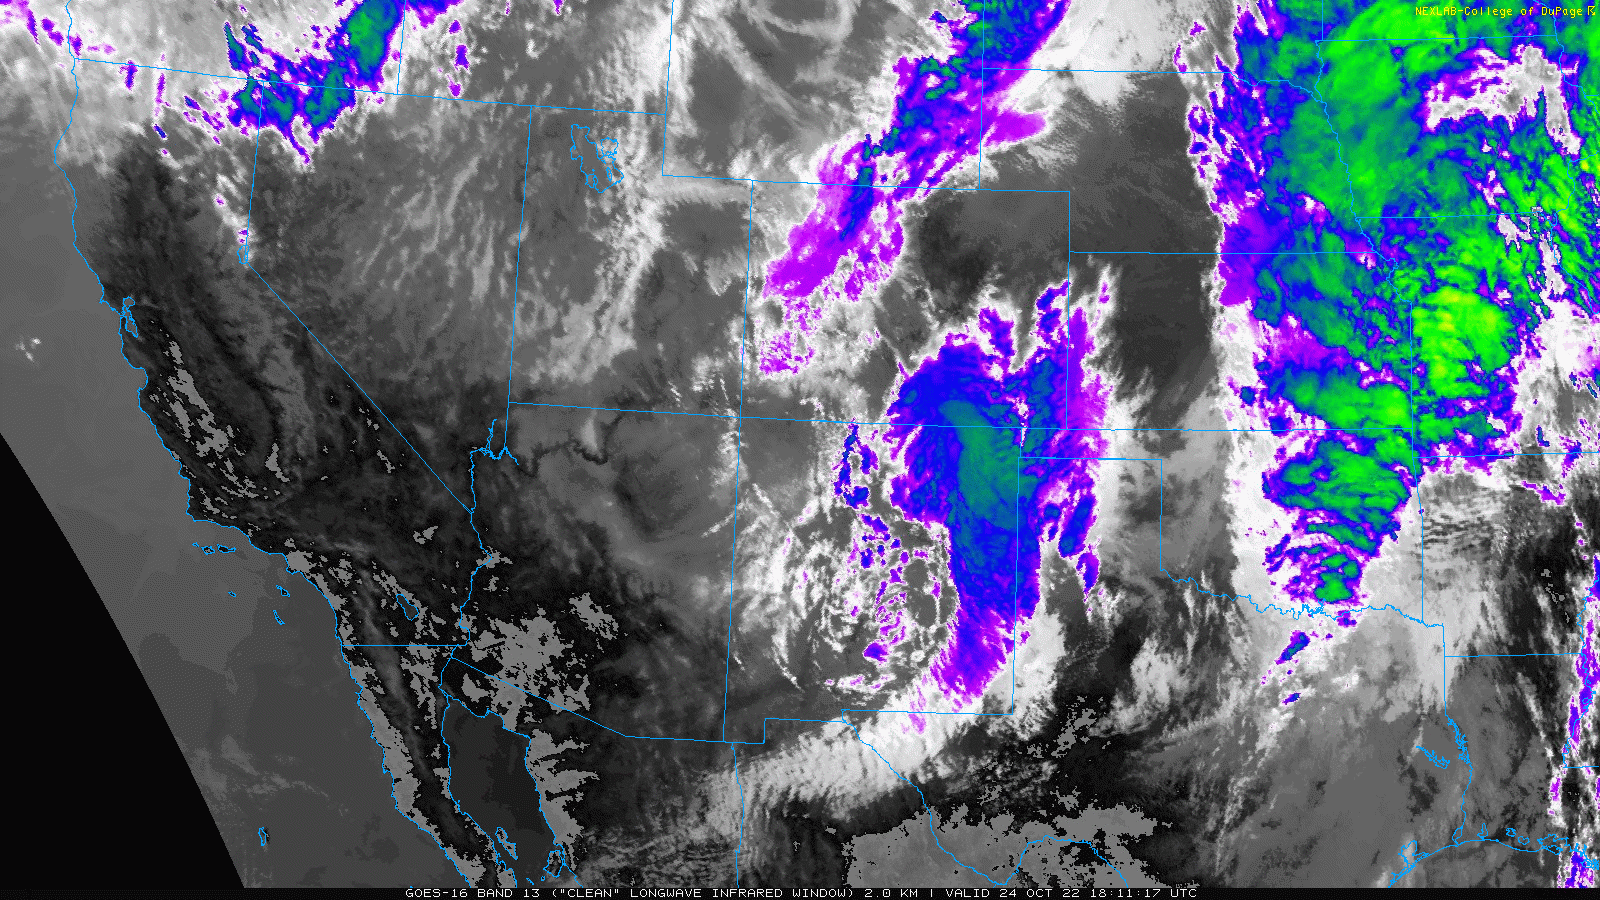 Regional infrared satellite loop valid from 1:11 pm to 2:57 pm on 24 October 2022.